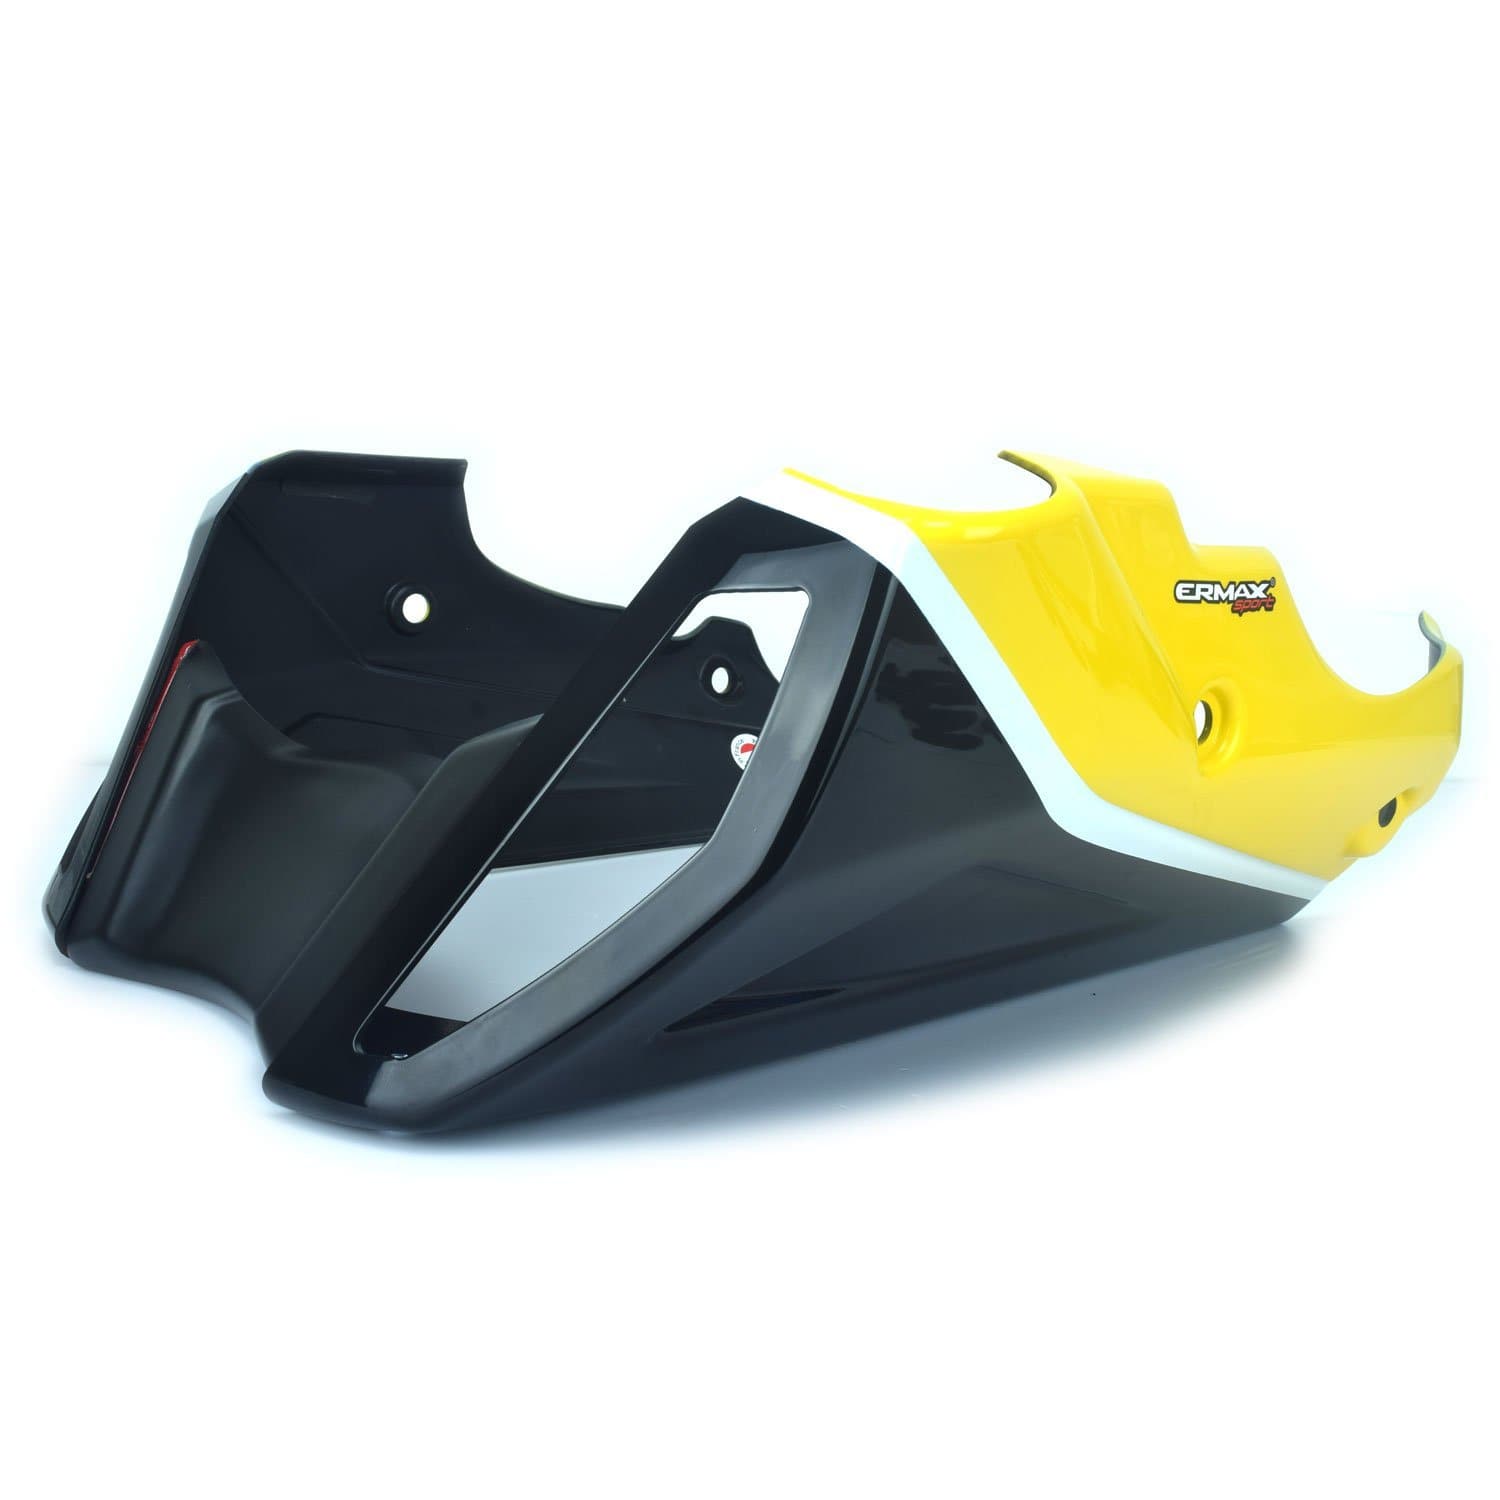 Ermax Belly Pan | Gloss Yellow/Matte Black (60th Anniversary) | Yamaha XSR 900 2016>2016-E890281131-Belly Pans-Pyramid Motorcycle Accessories